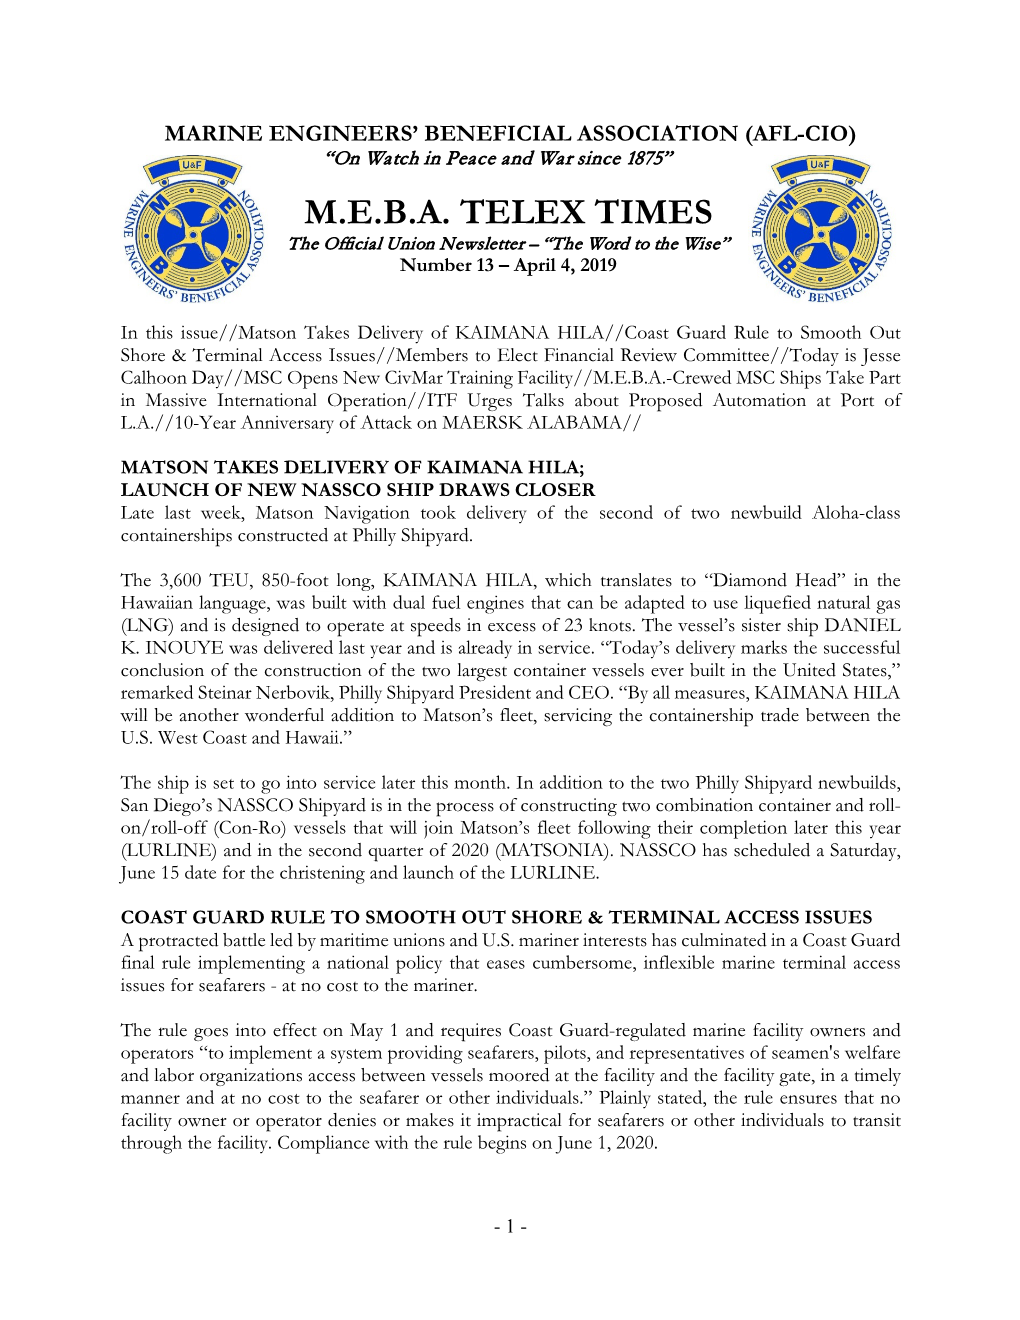 M.E.B.A. TELEX TIMES the Official Union Newsletter – “The Word to the Wise” Number 13 – April 4, 2019